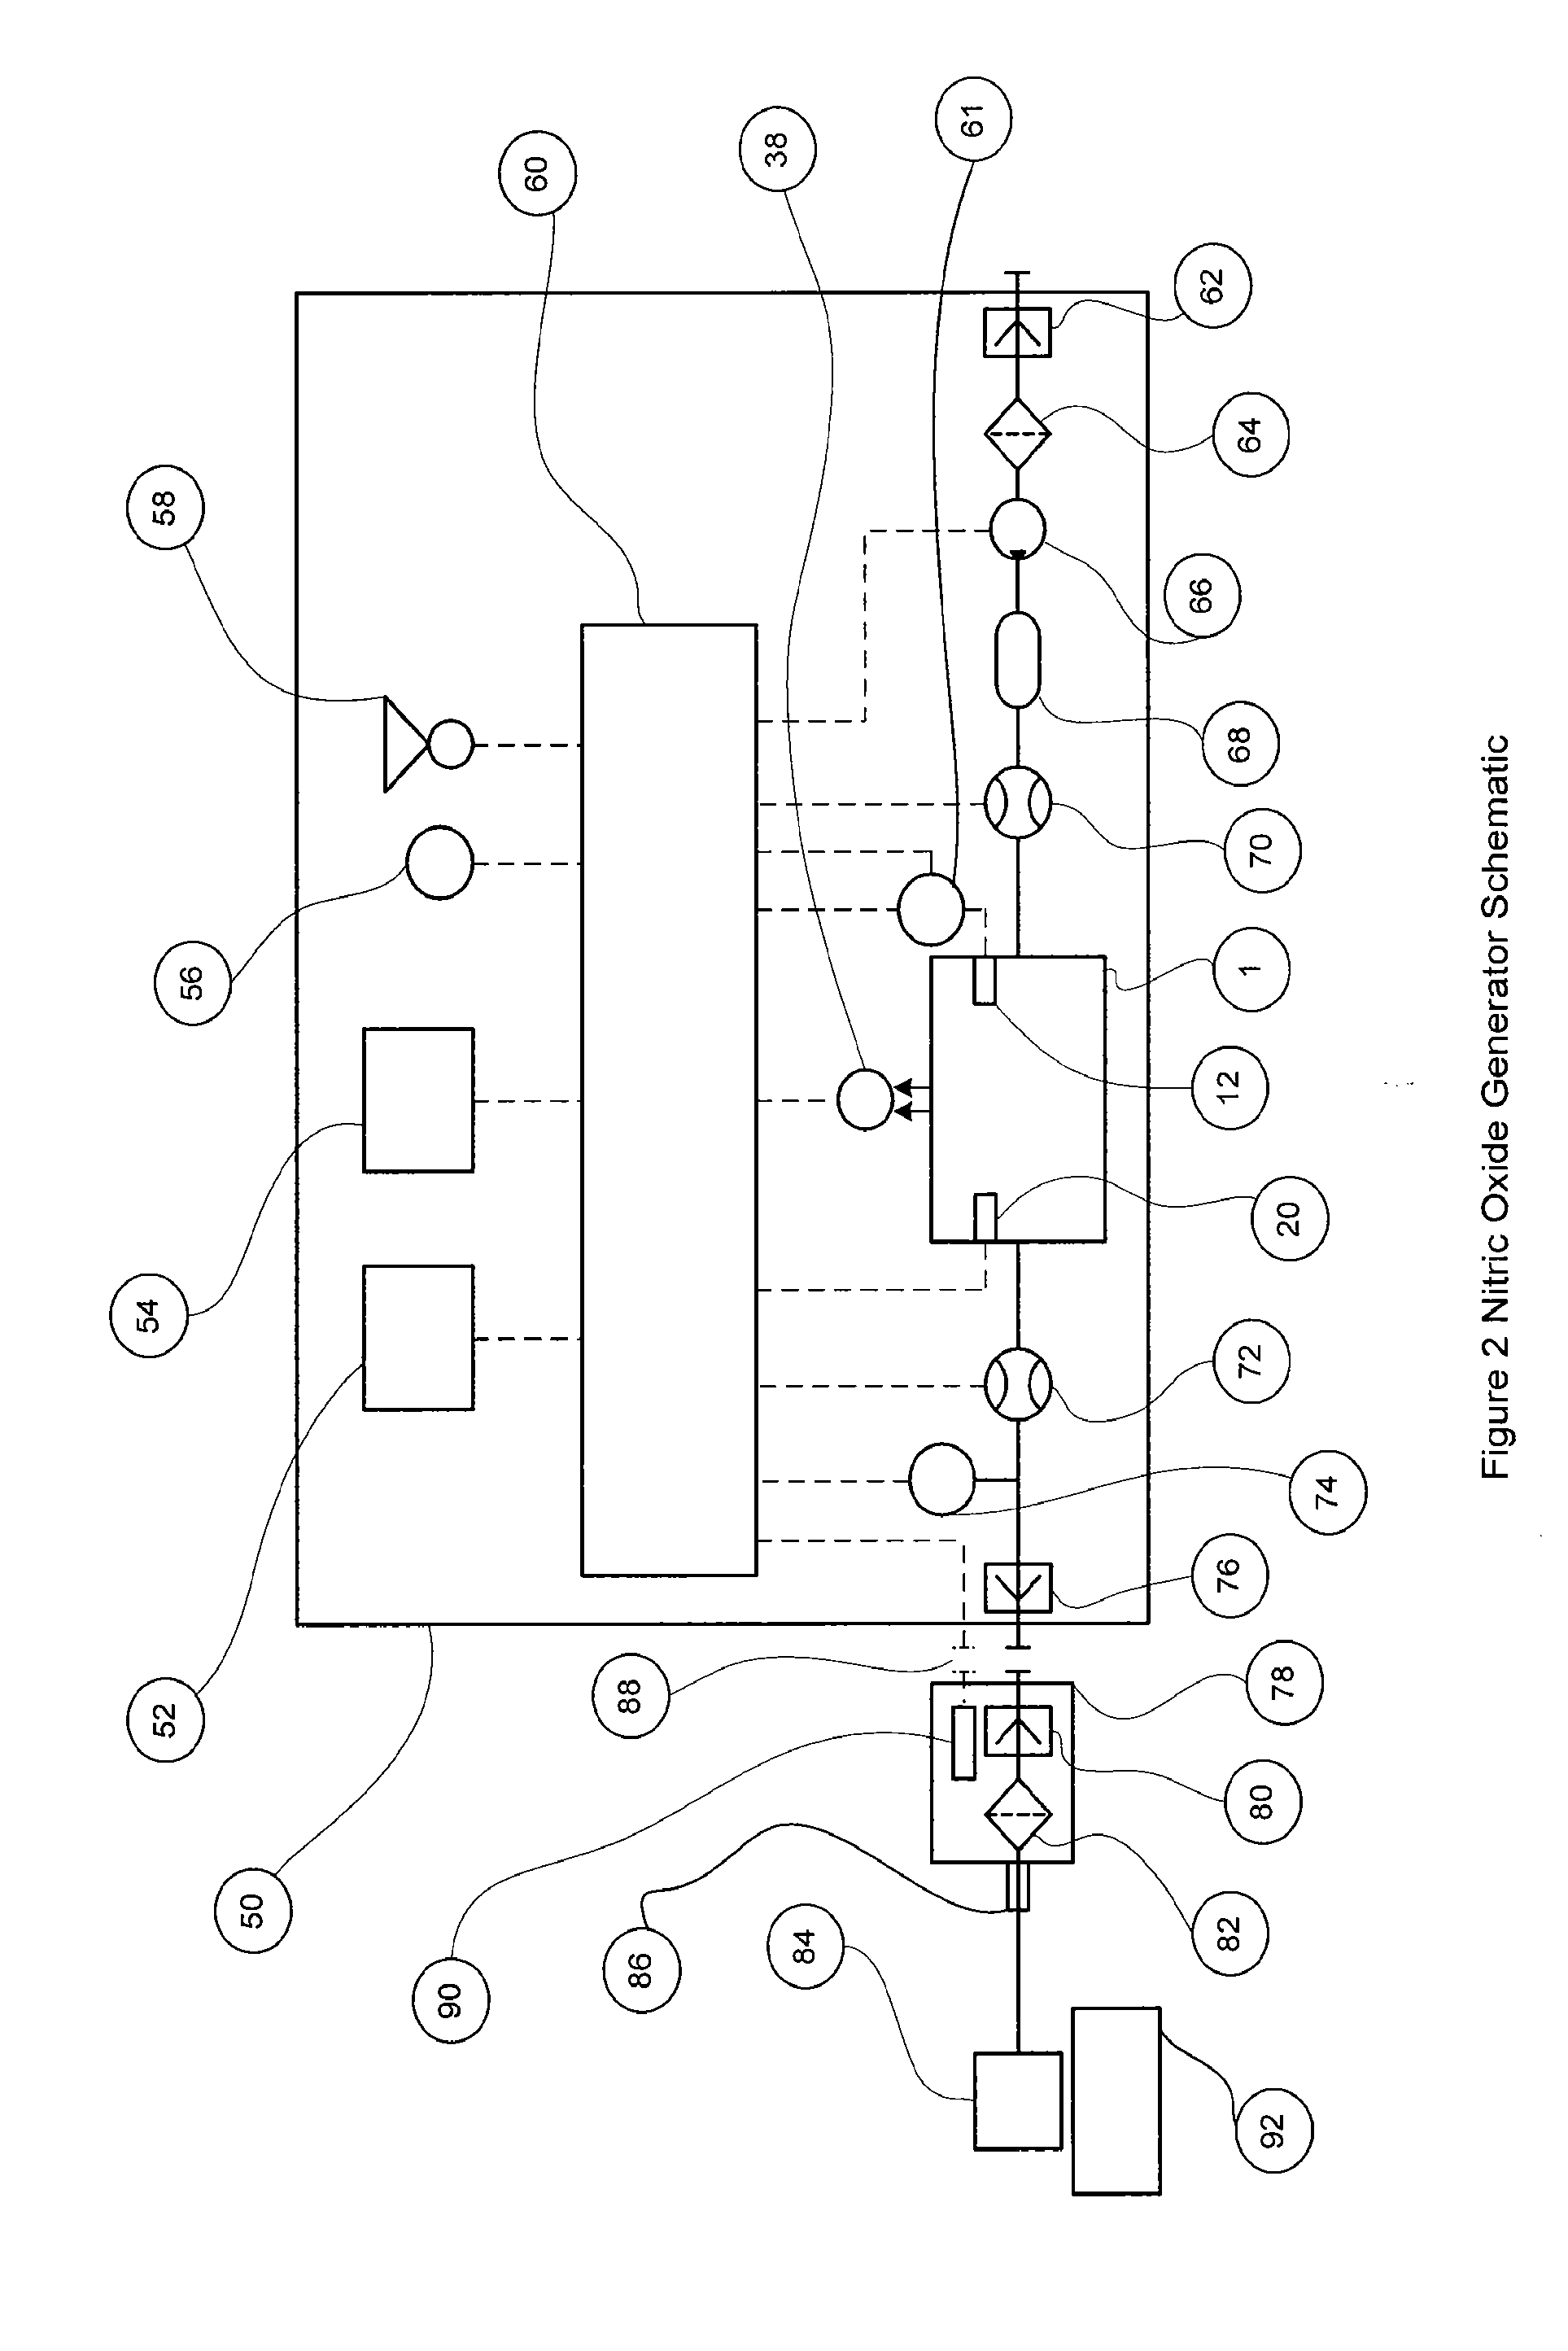 Apparatus and method for generating nitric oxide in controlled and accurate amounts